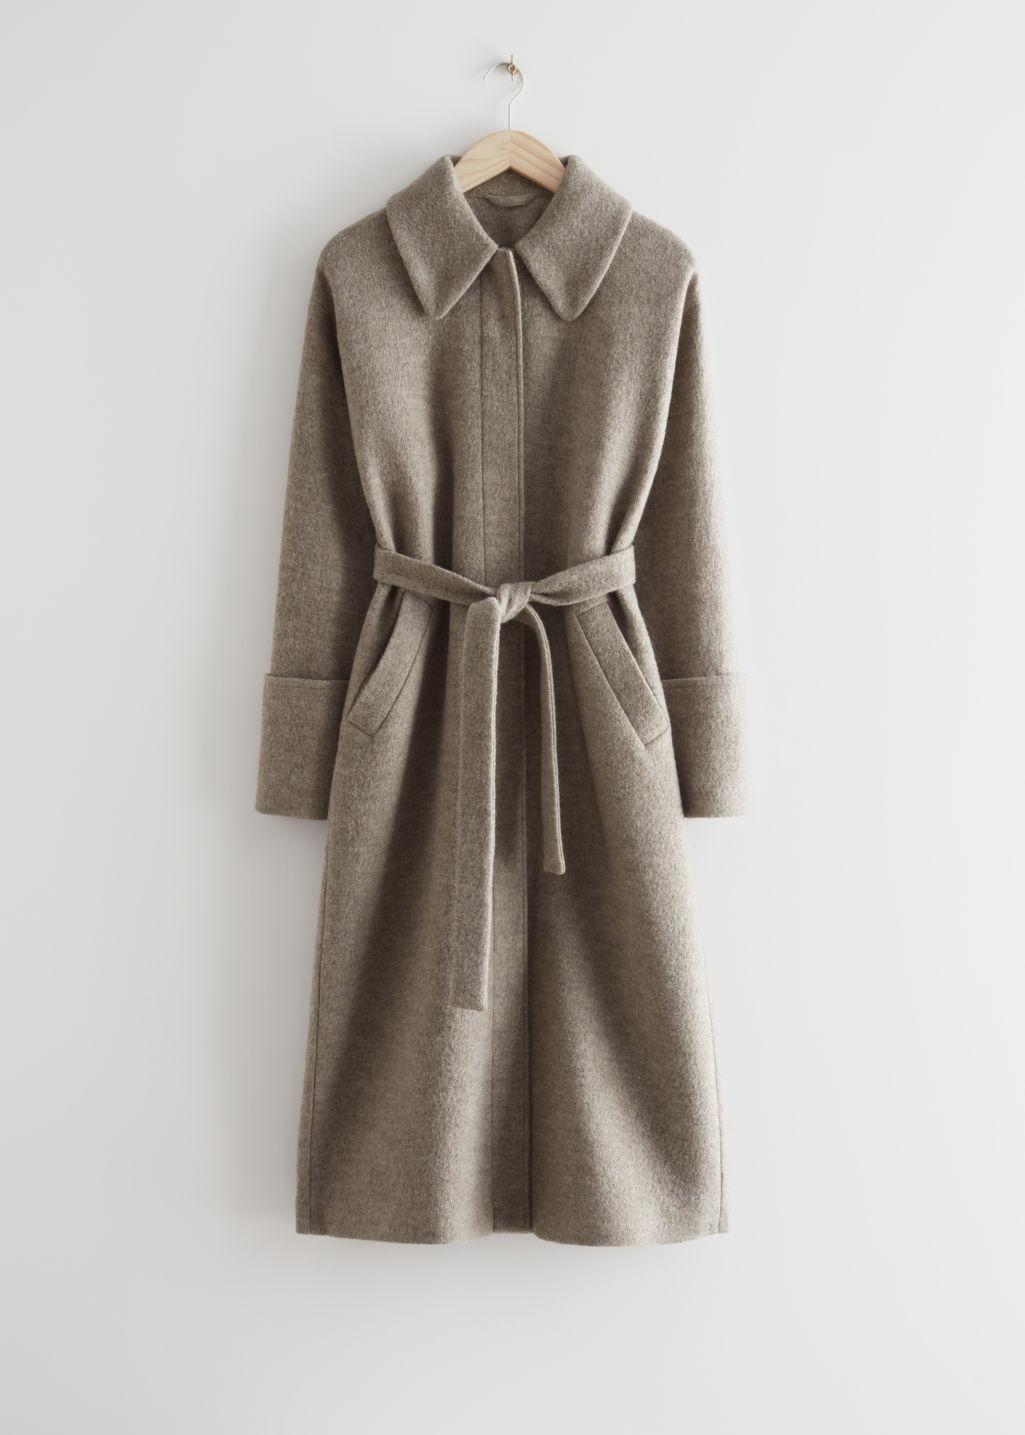 & Other Stories Relaxed Belted Wool Coat in Natural | Lyst